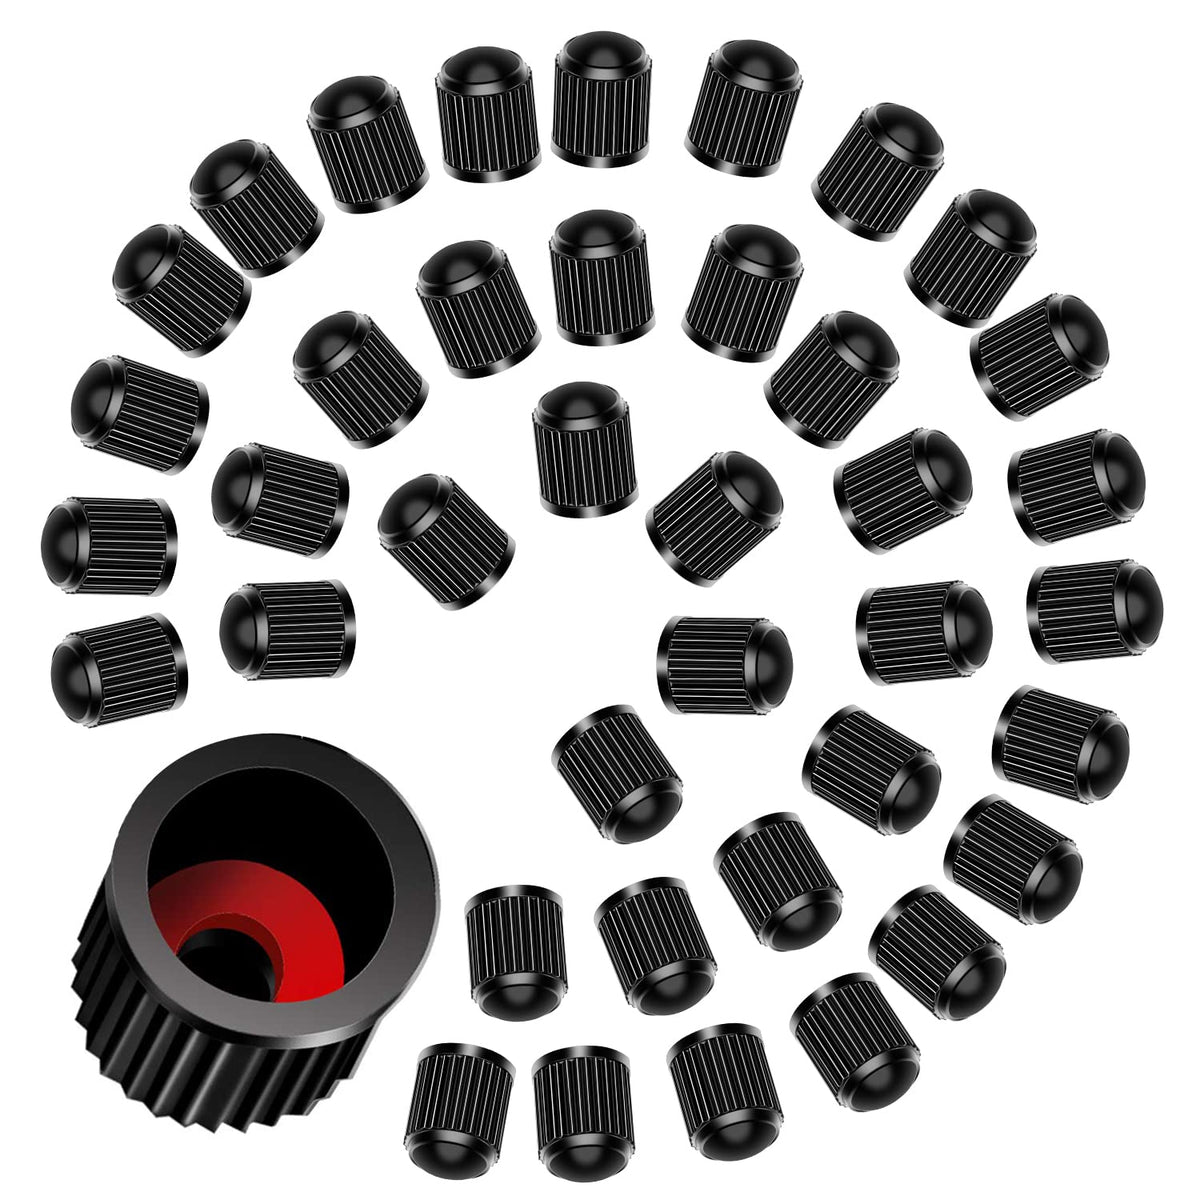 40pcs Tyre Valve Caps, Plastic Car Tyre Valve Dust Caps Universal Tire Stem Covers with Red Seal Ring, Black Wheel Dust Caps for Cars, Bikes, Trucks, Bicycle and Motorbike - Airtight Seal   Screw-On